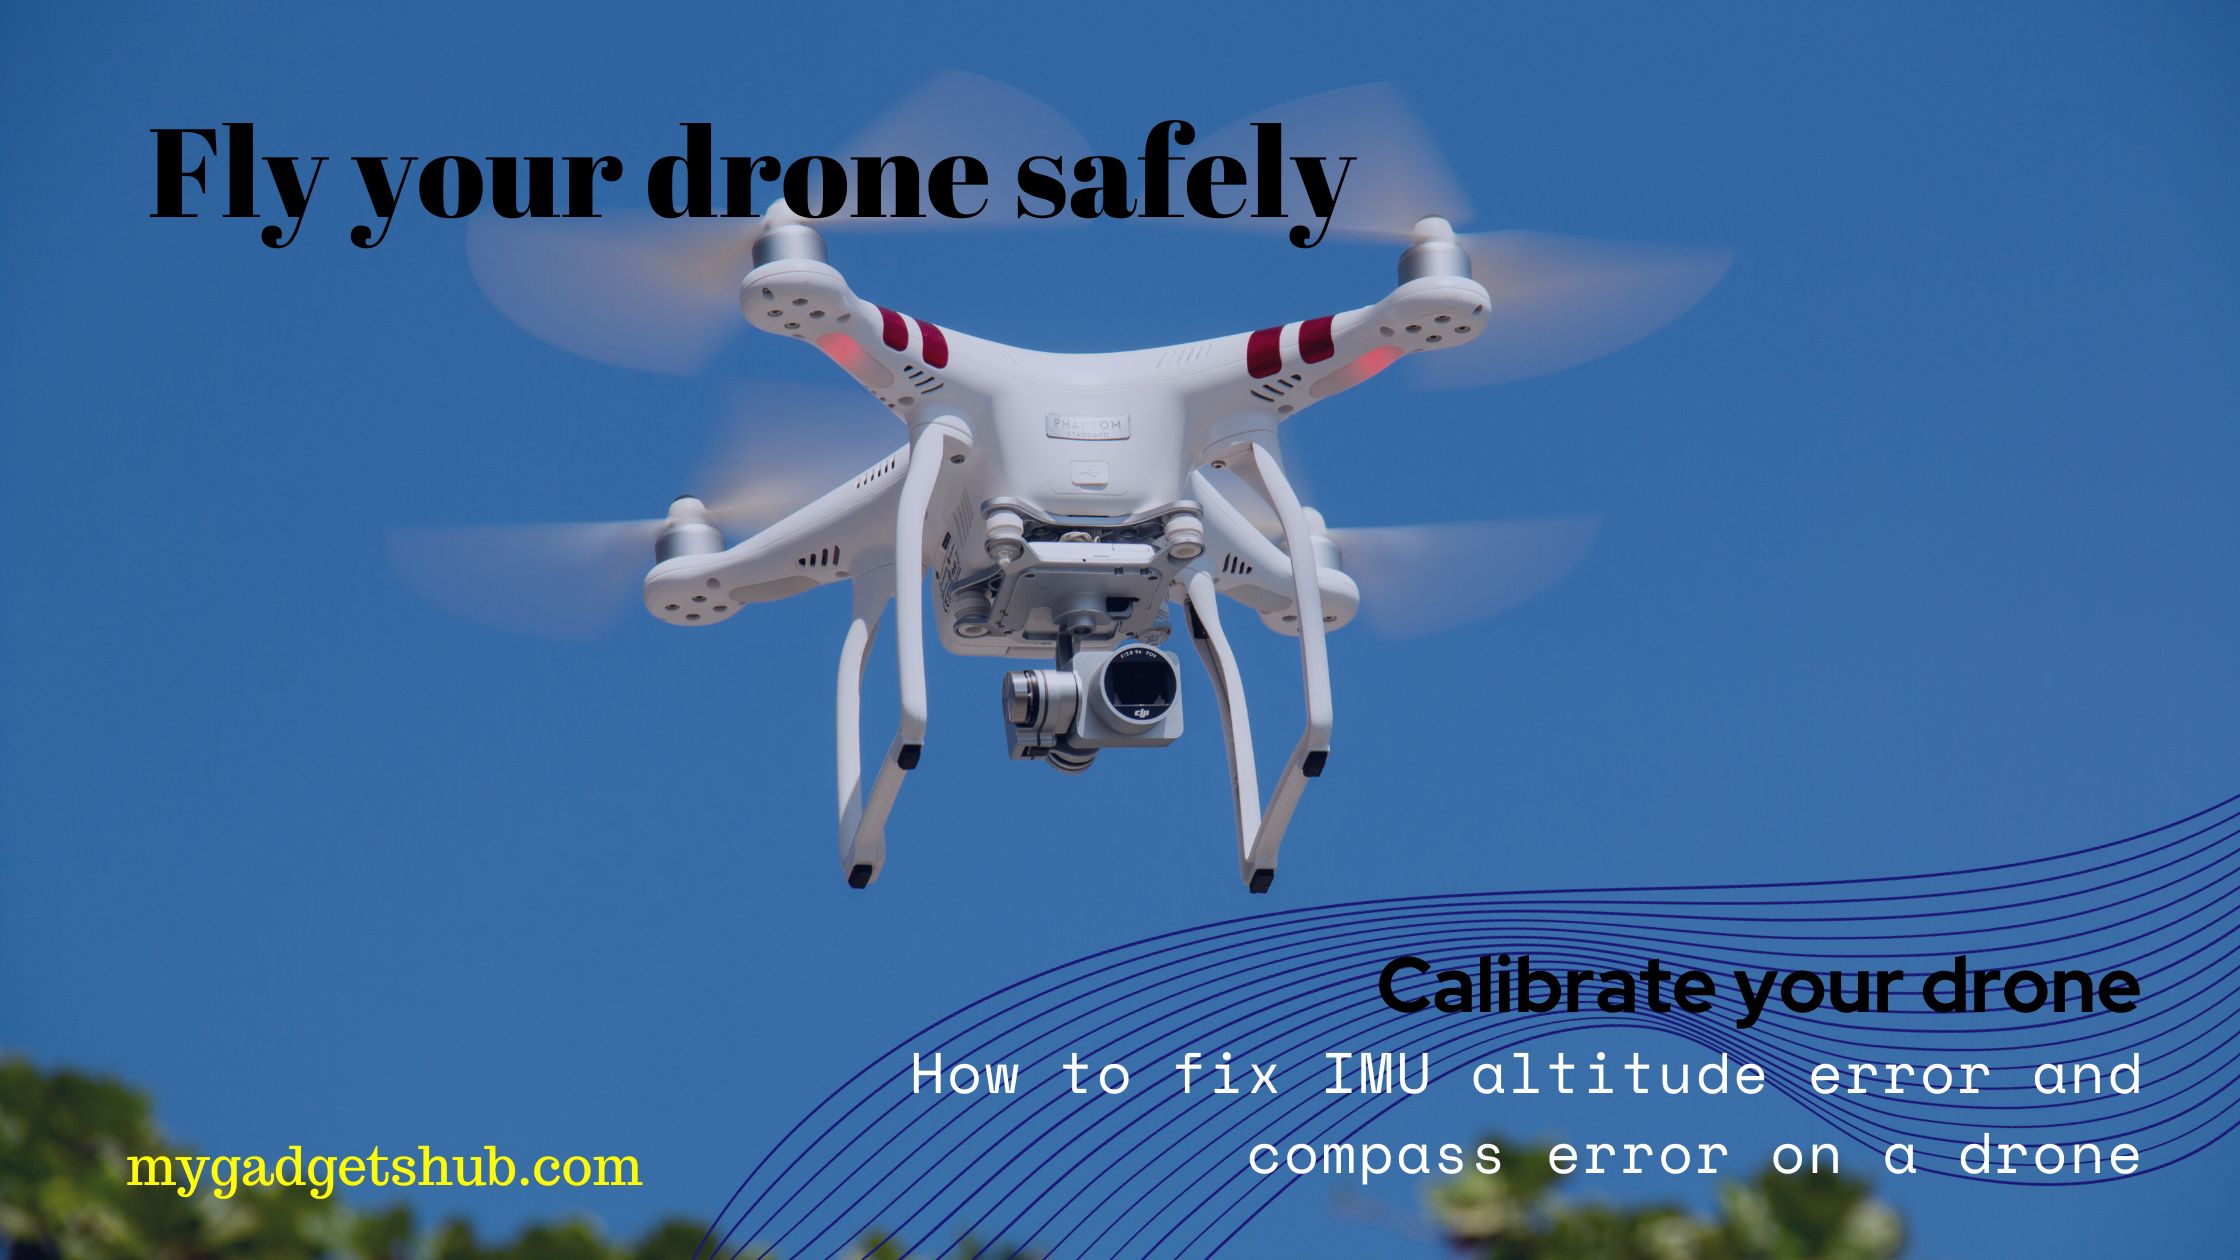 How to fix IMU altitude error and compass error on a drone